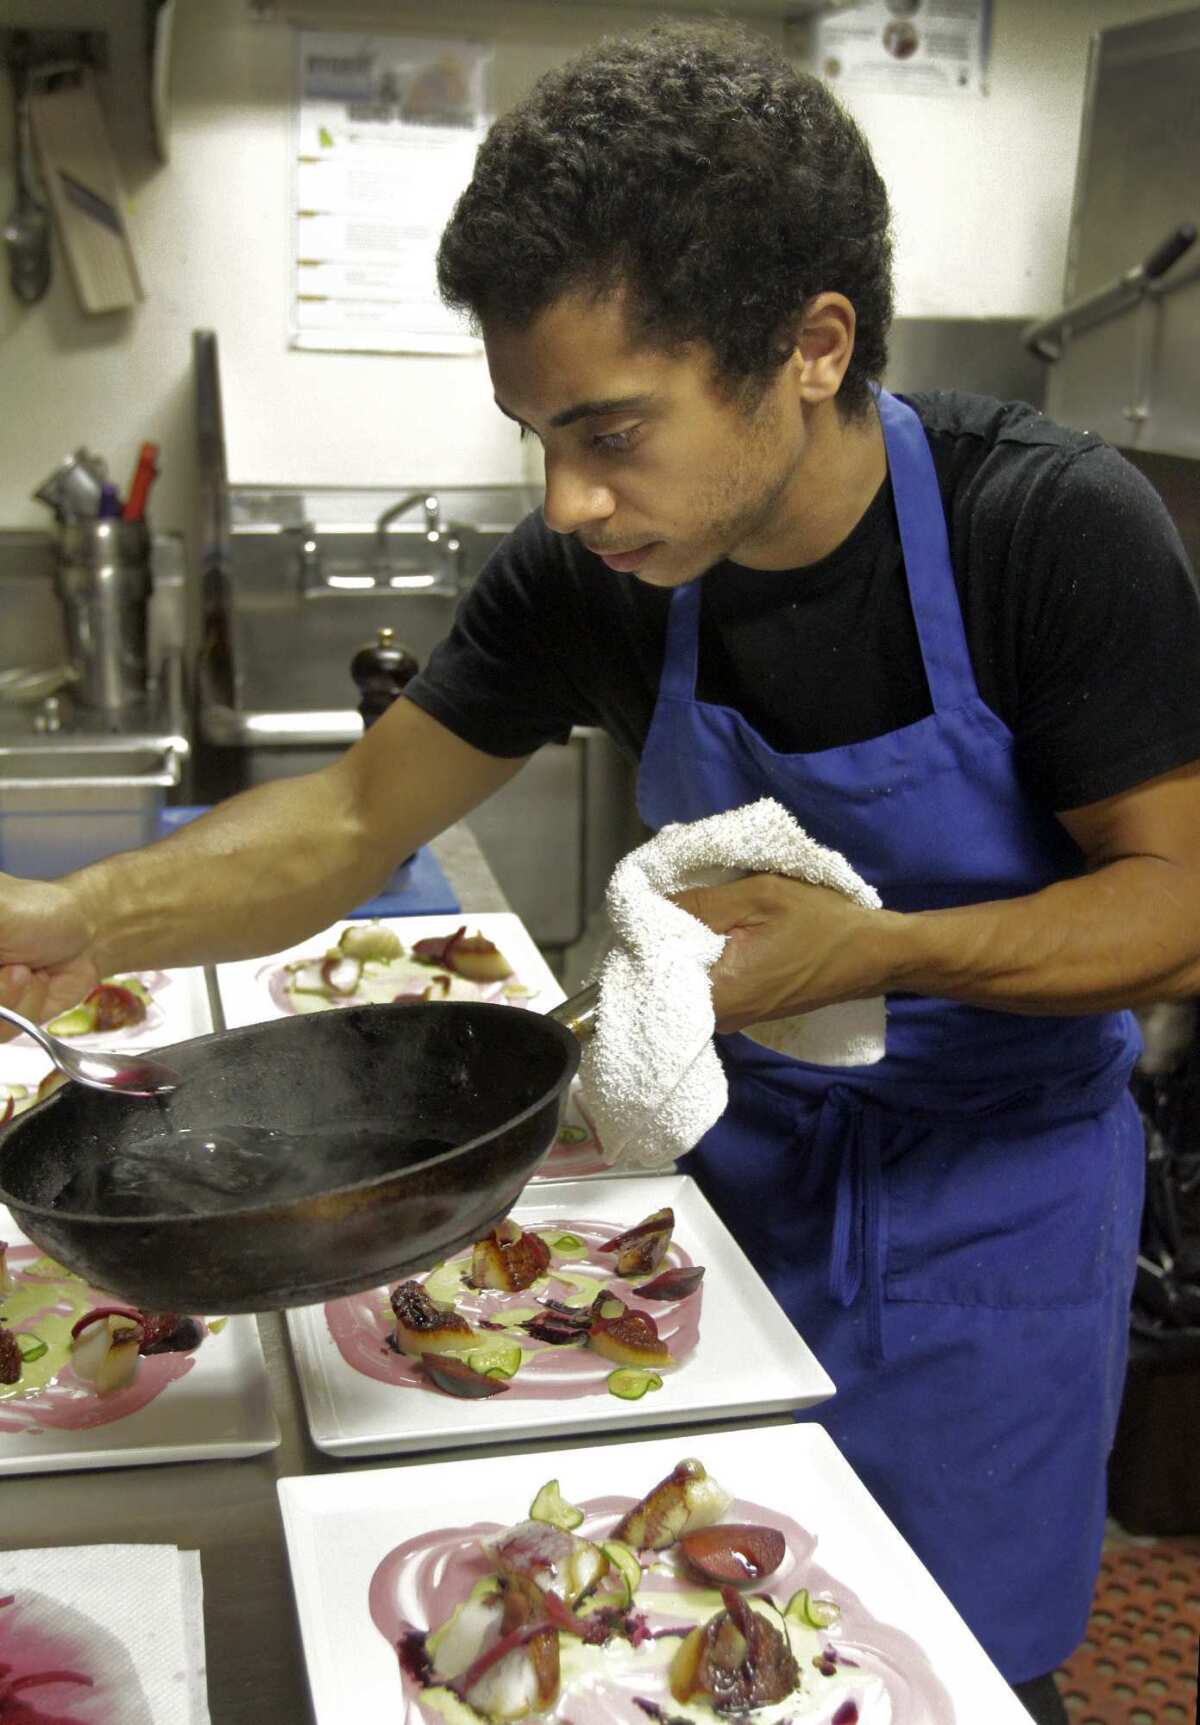 Chef Miles Thompson in the kitchen preparing food at the restaurant at Allston Yacht Club in Echo Park. The location is where the chef's pop-up restaurant Vagrancy Project has taken up residence.